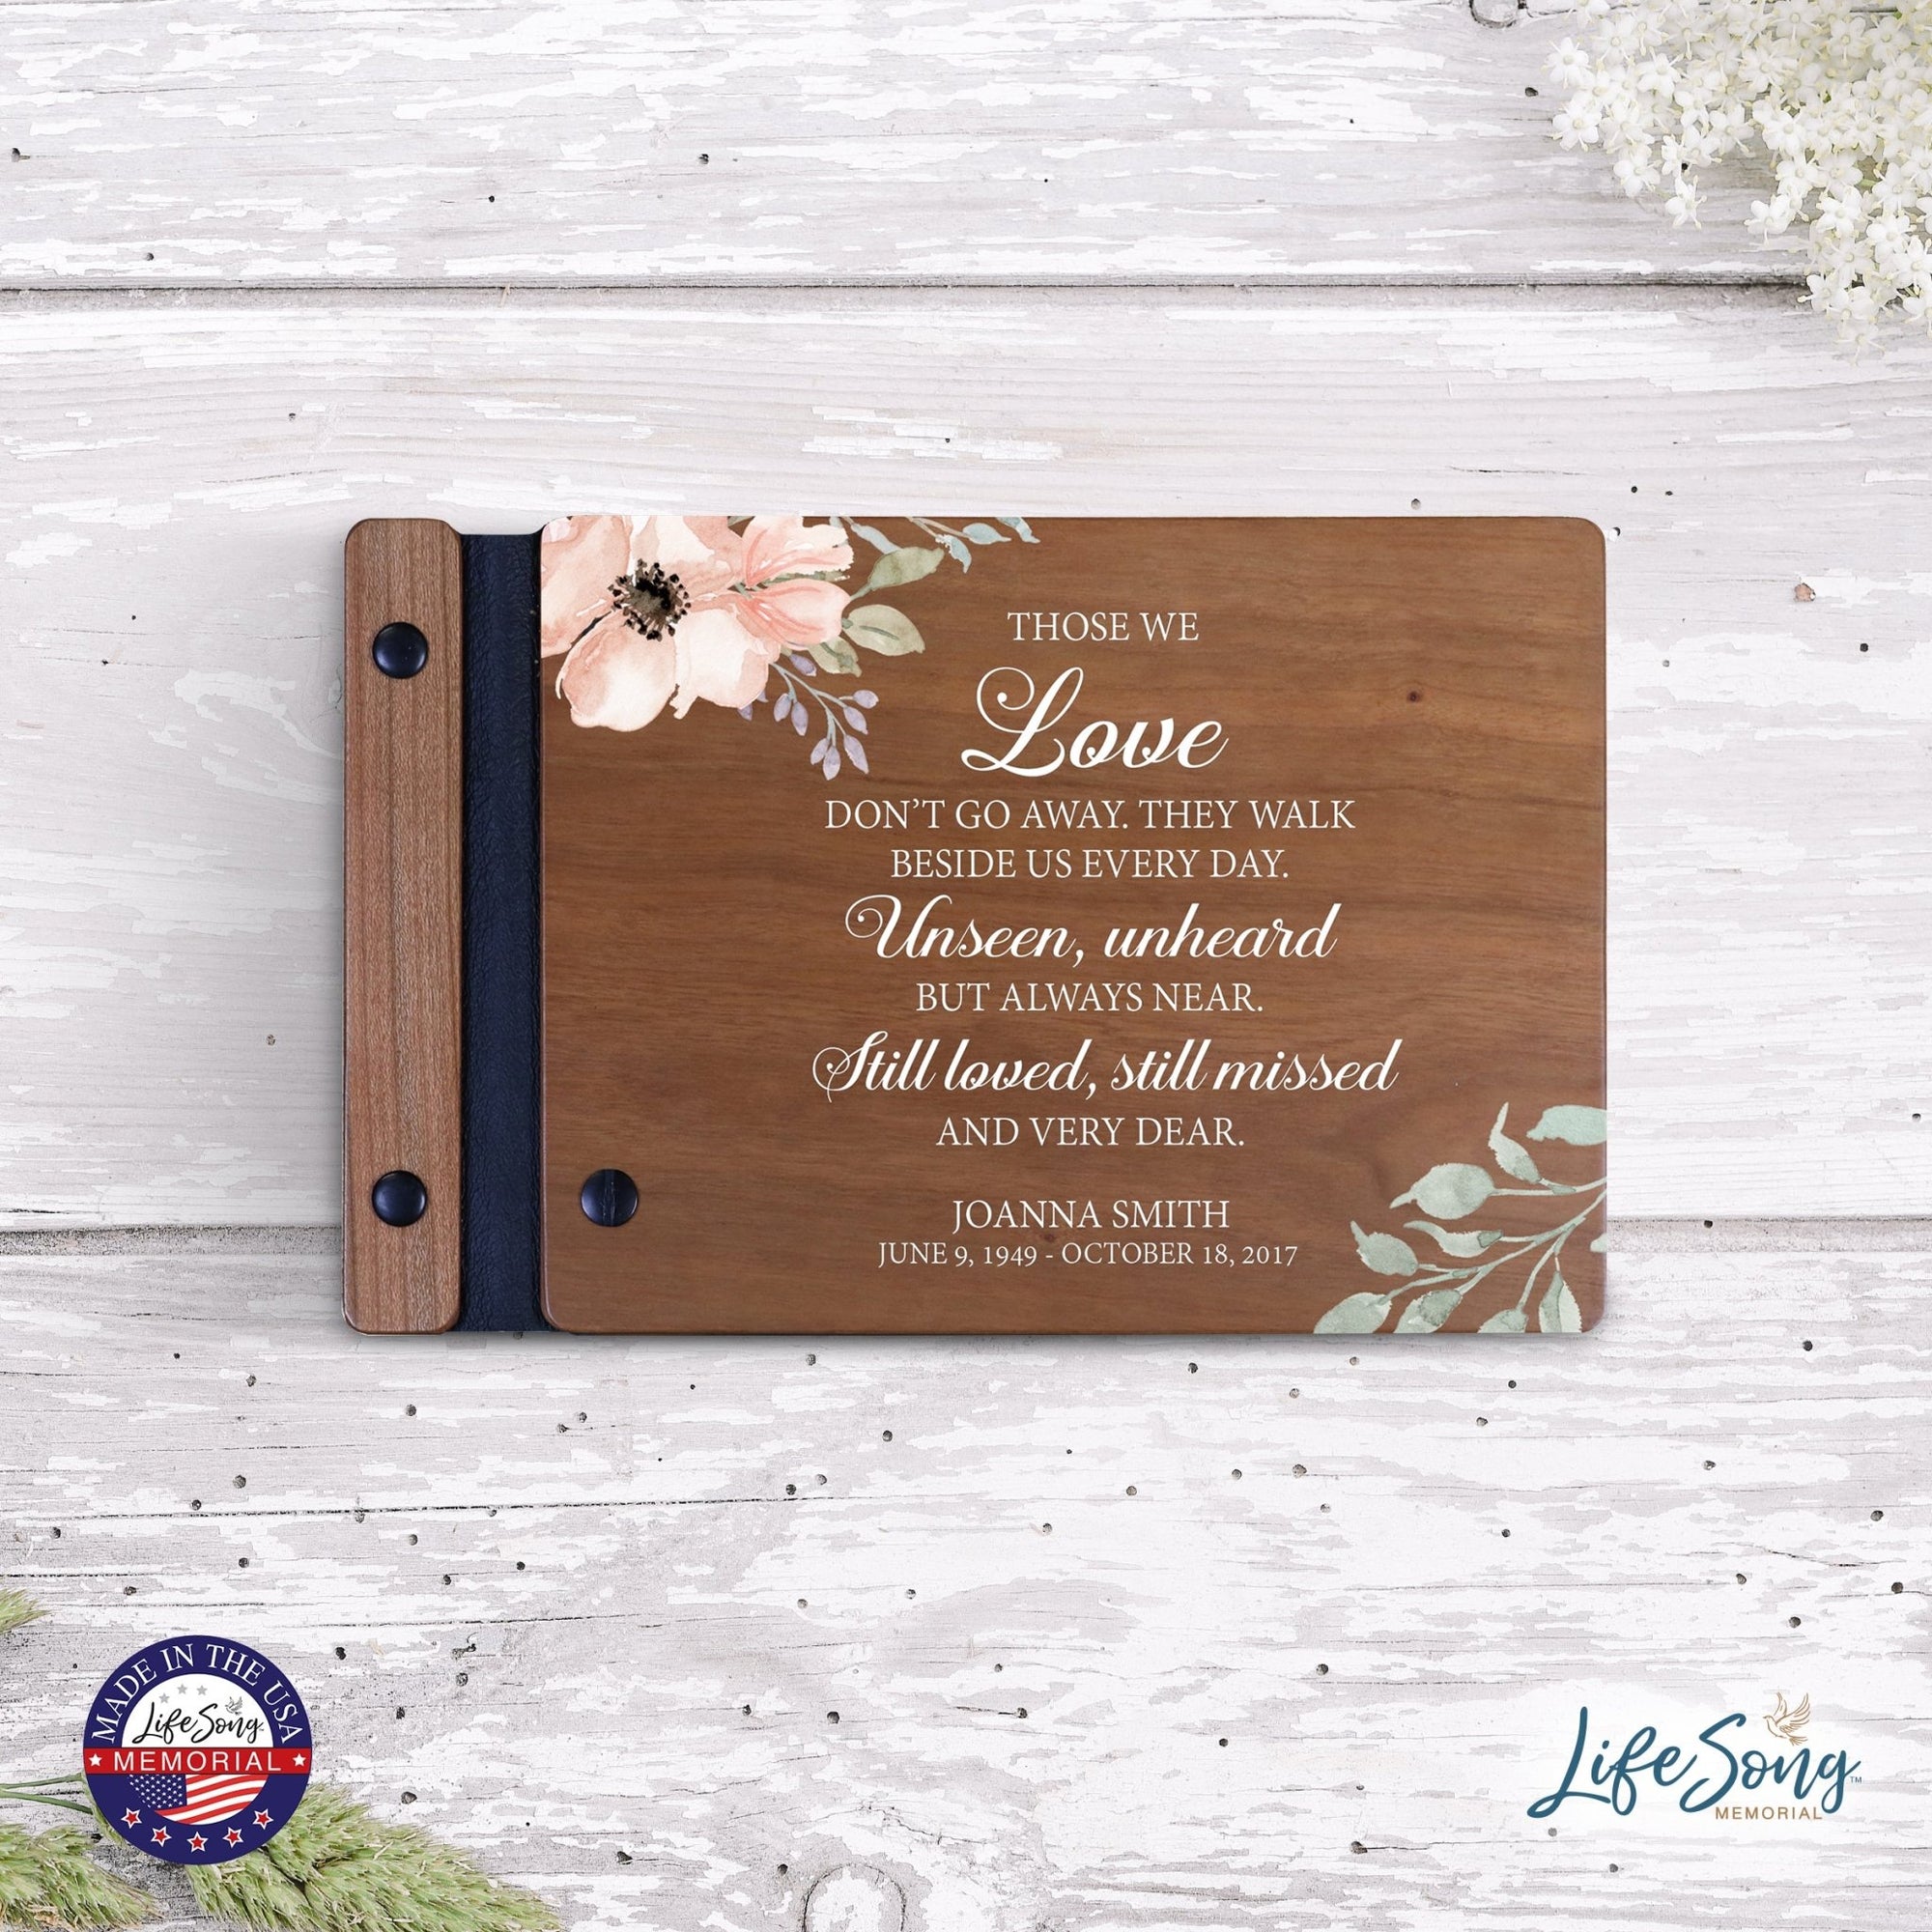 Personalized Small Wooden Memorial Guestbook 9.375x6 - Those We Love - LifeSong Milestones